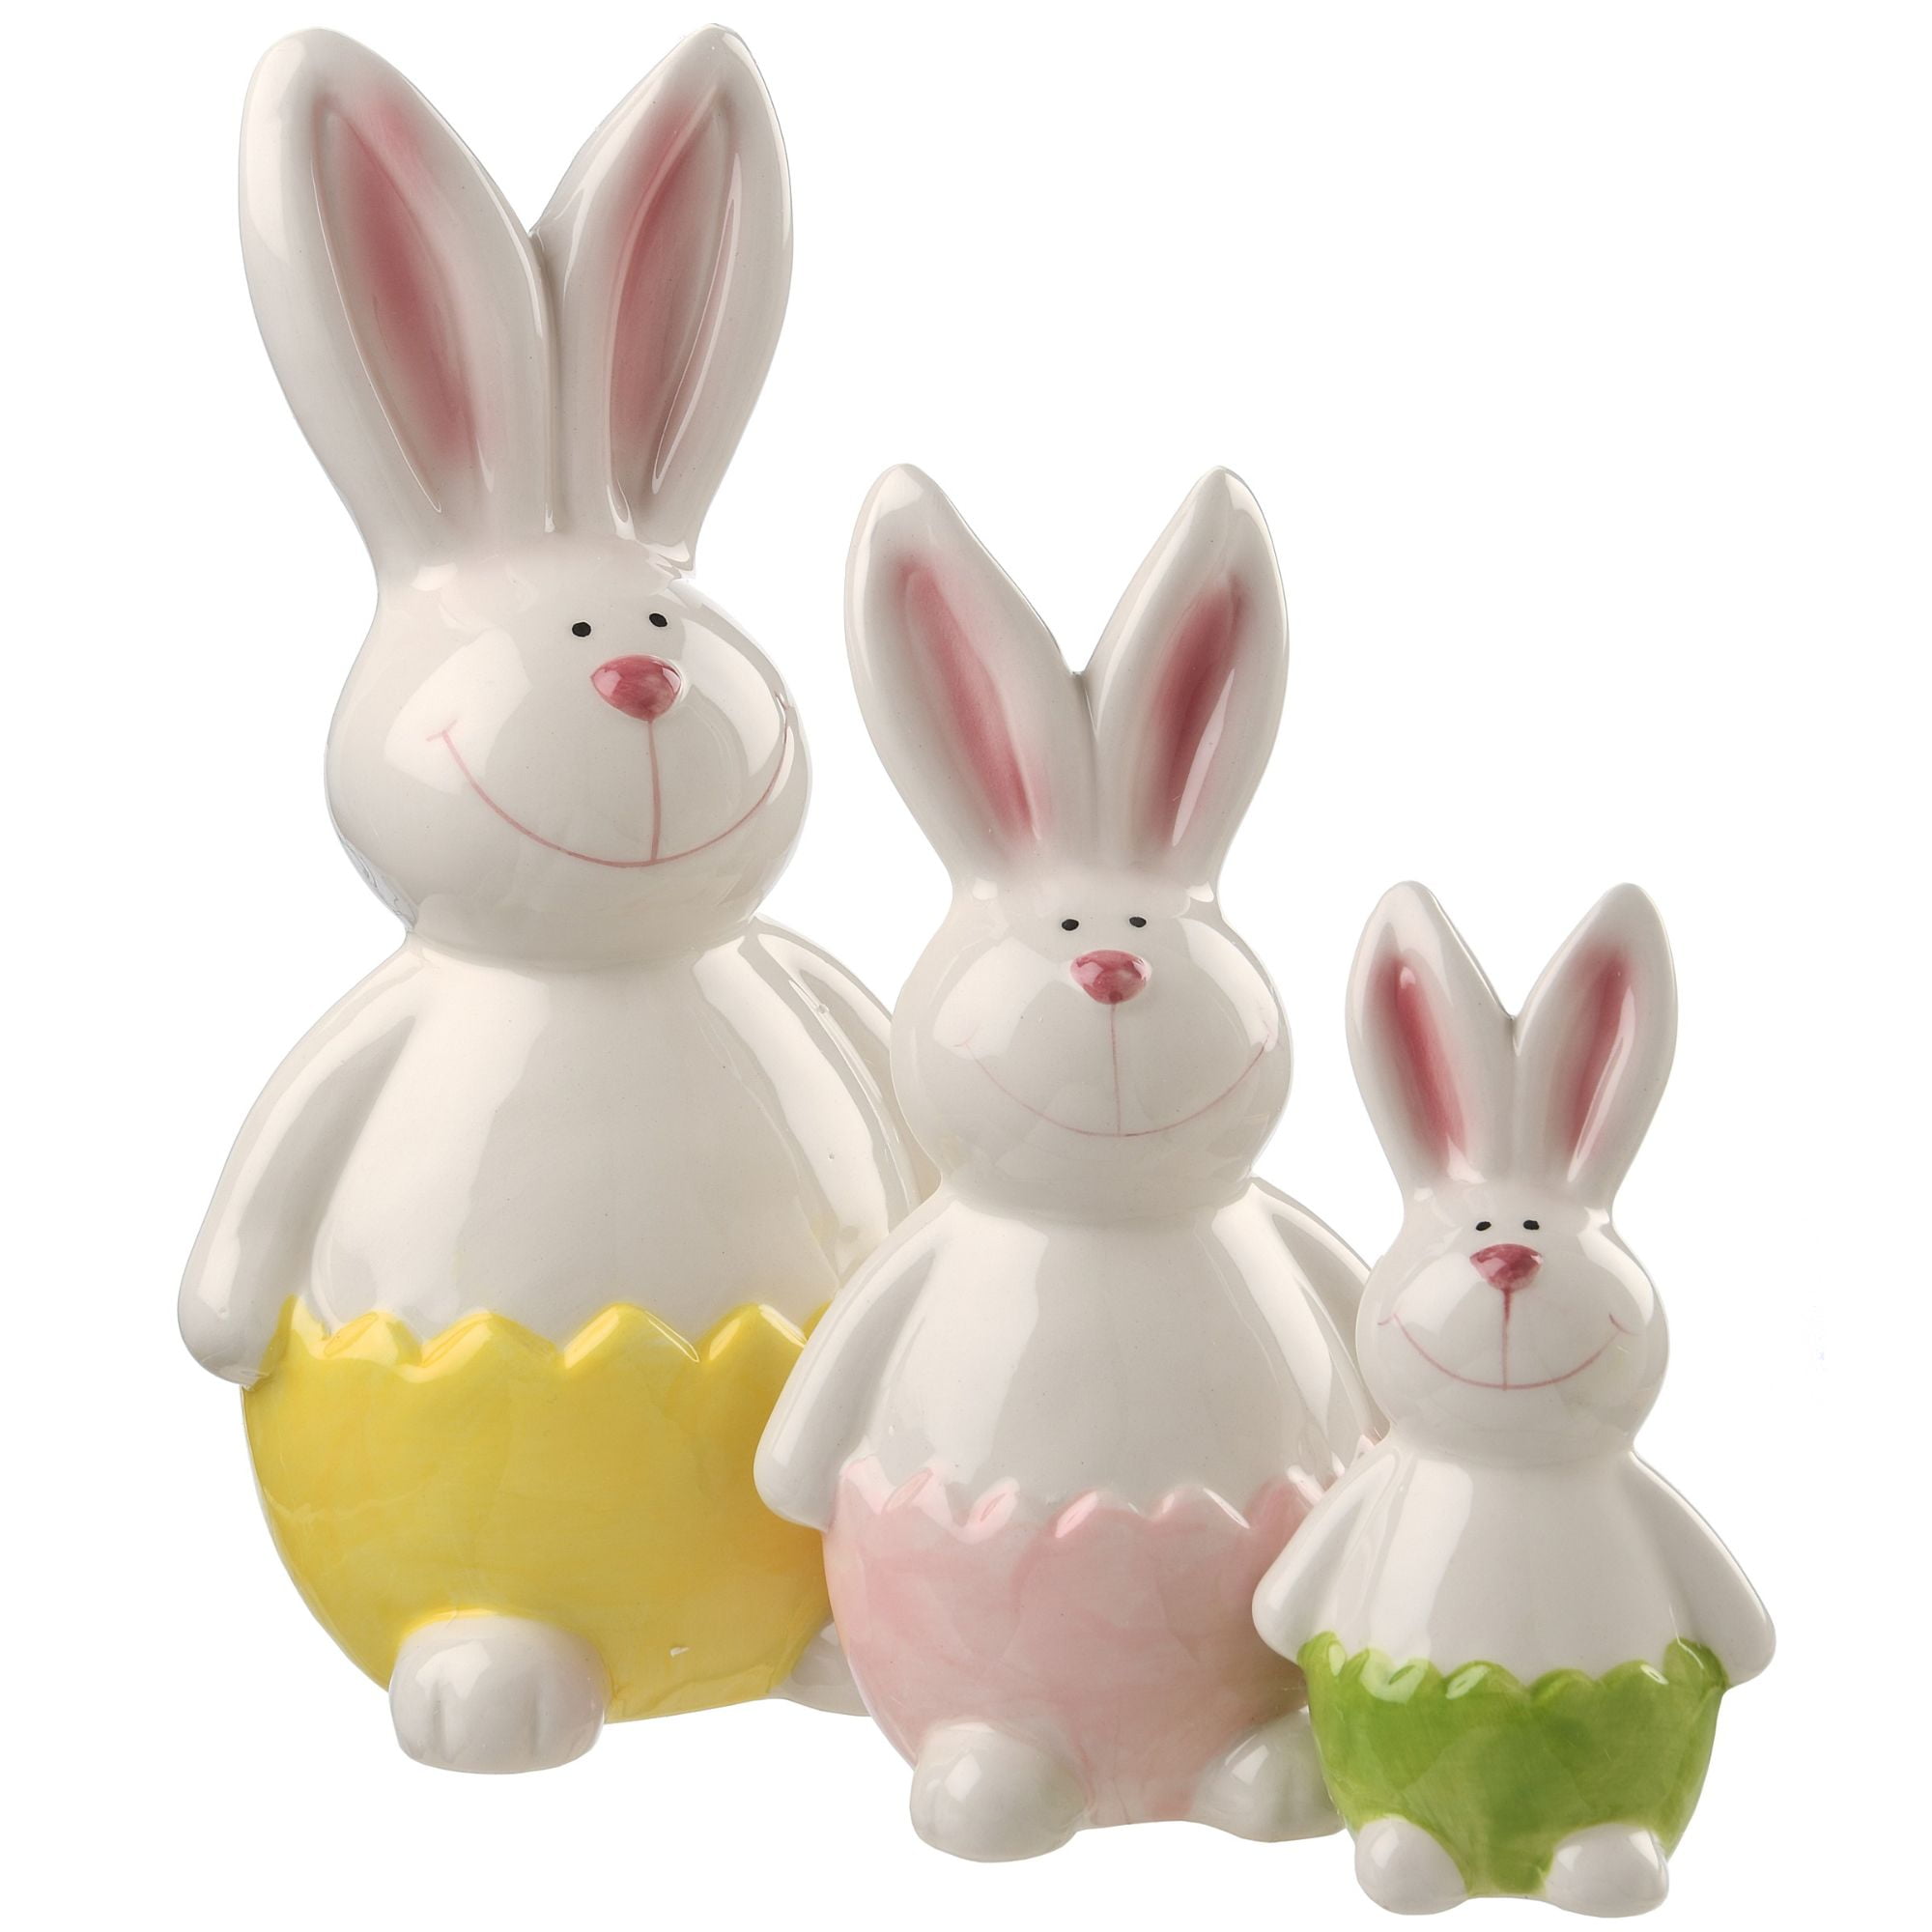 Dolls House 3 Rabbits with Easter Eggs Ornaments Miniature Nursery Accessory 